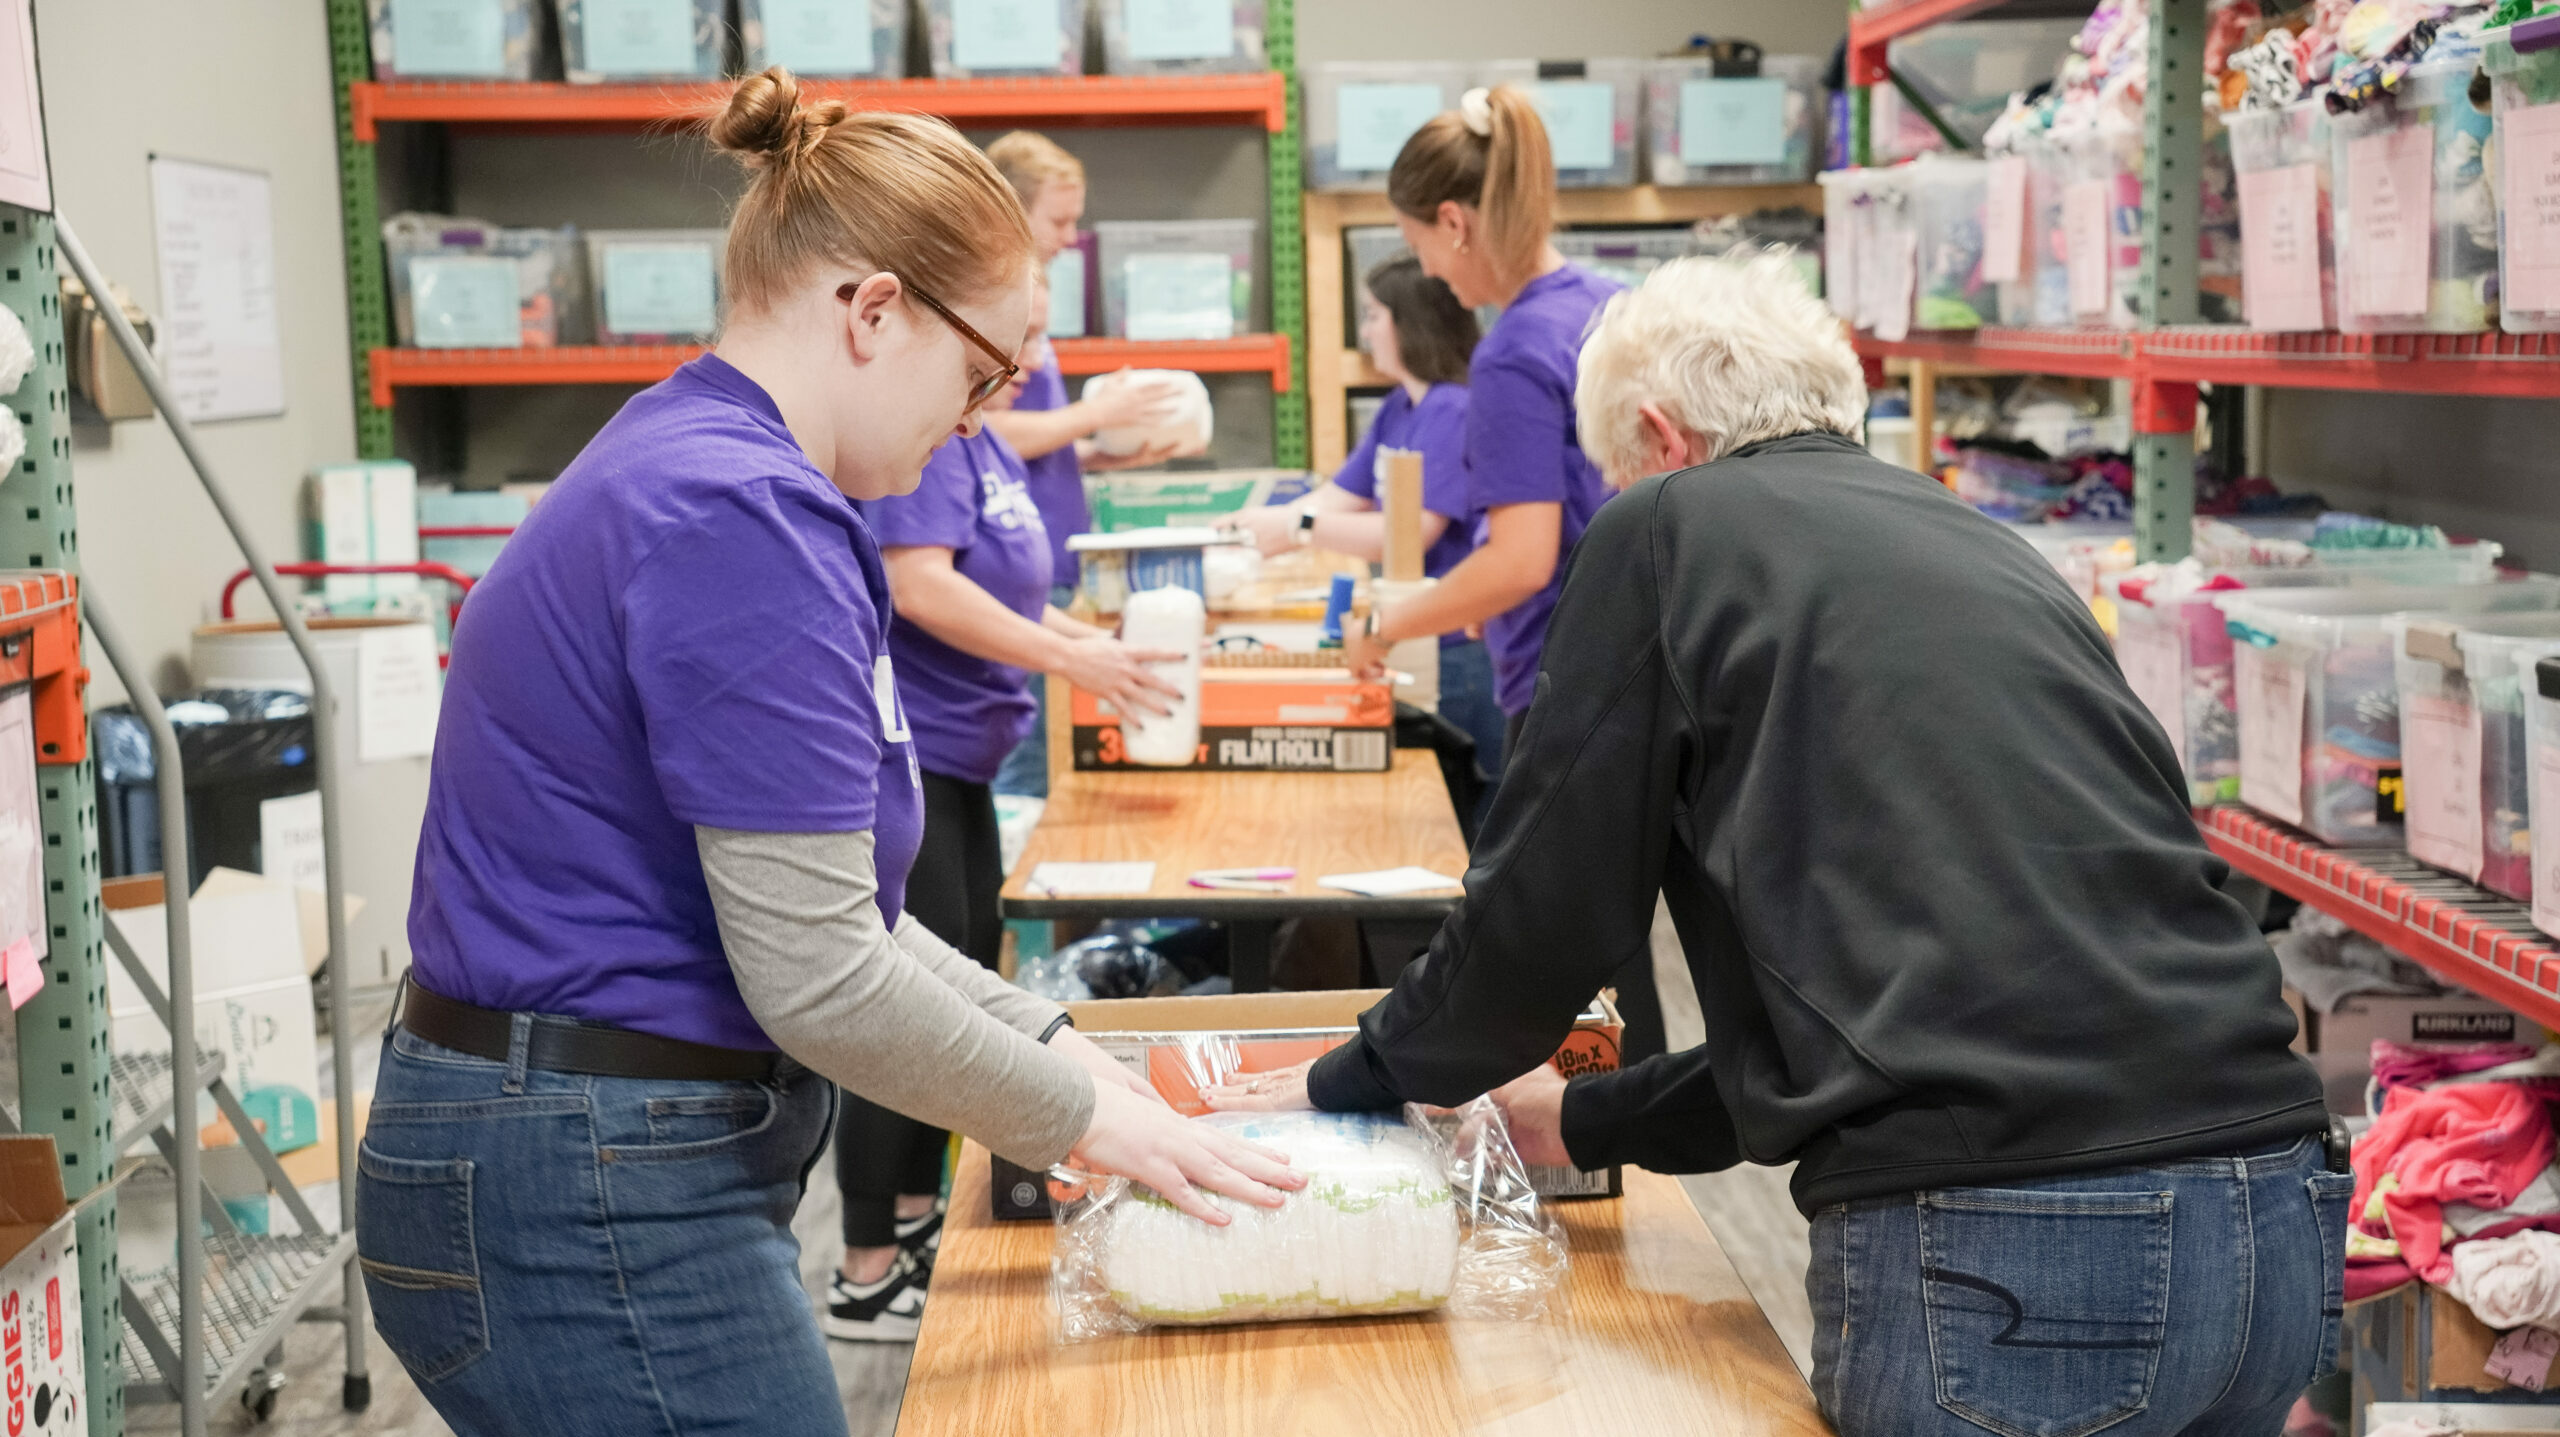 Pictures of Volunteer in Purple shirt wrapping diapers